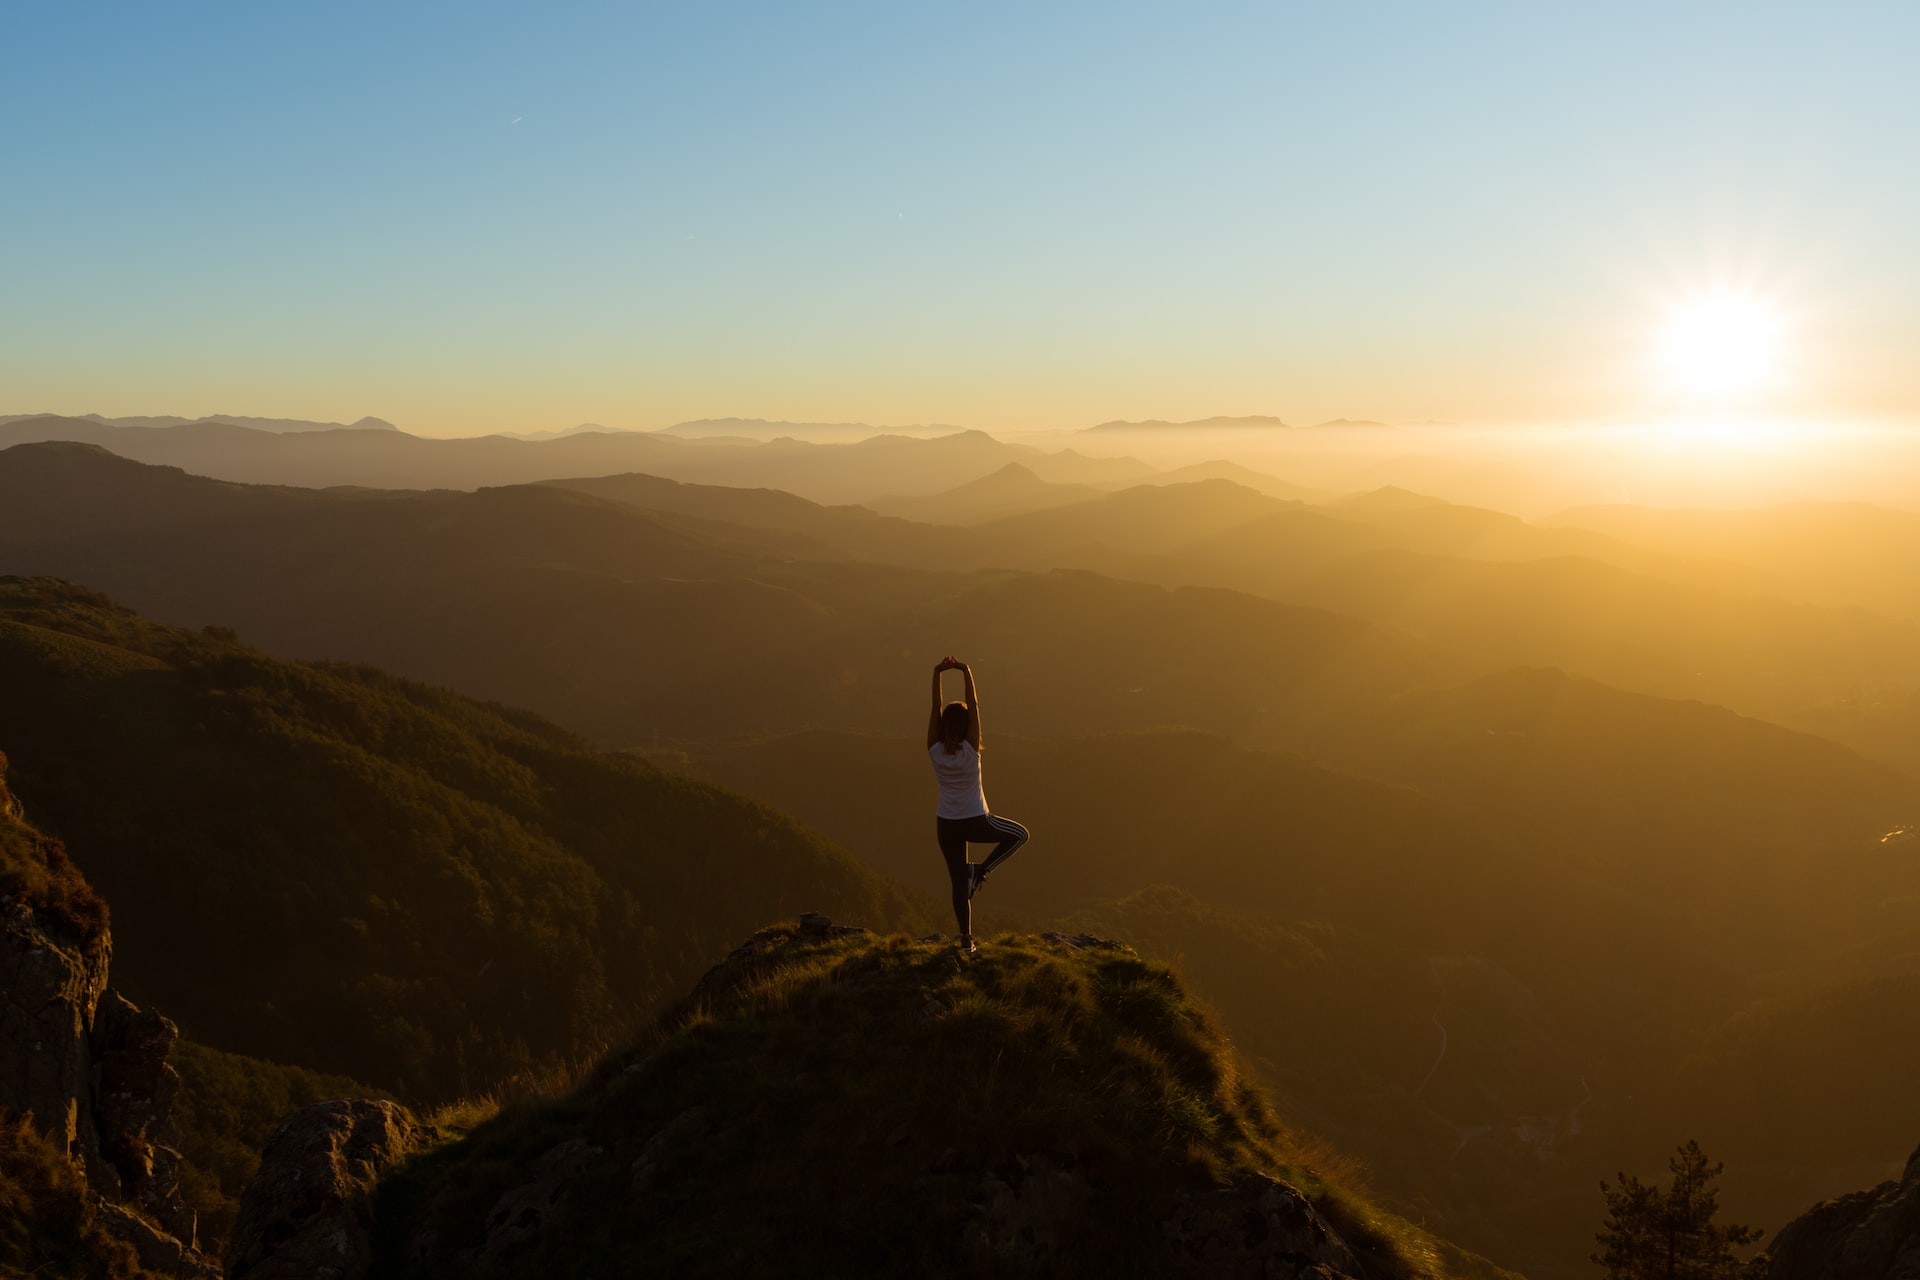 A person practicing yoga on a cliff at sunrise.